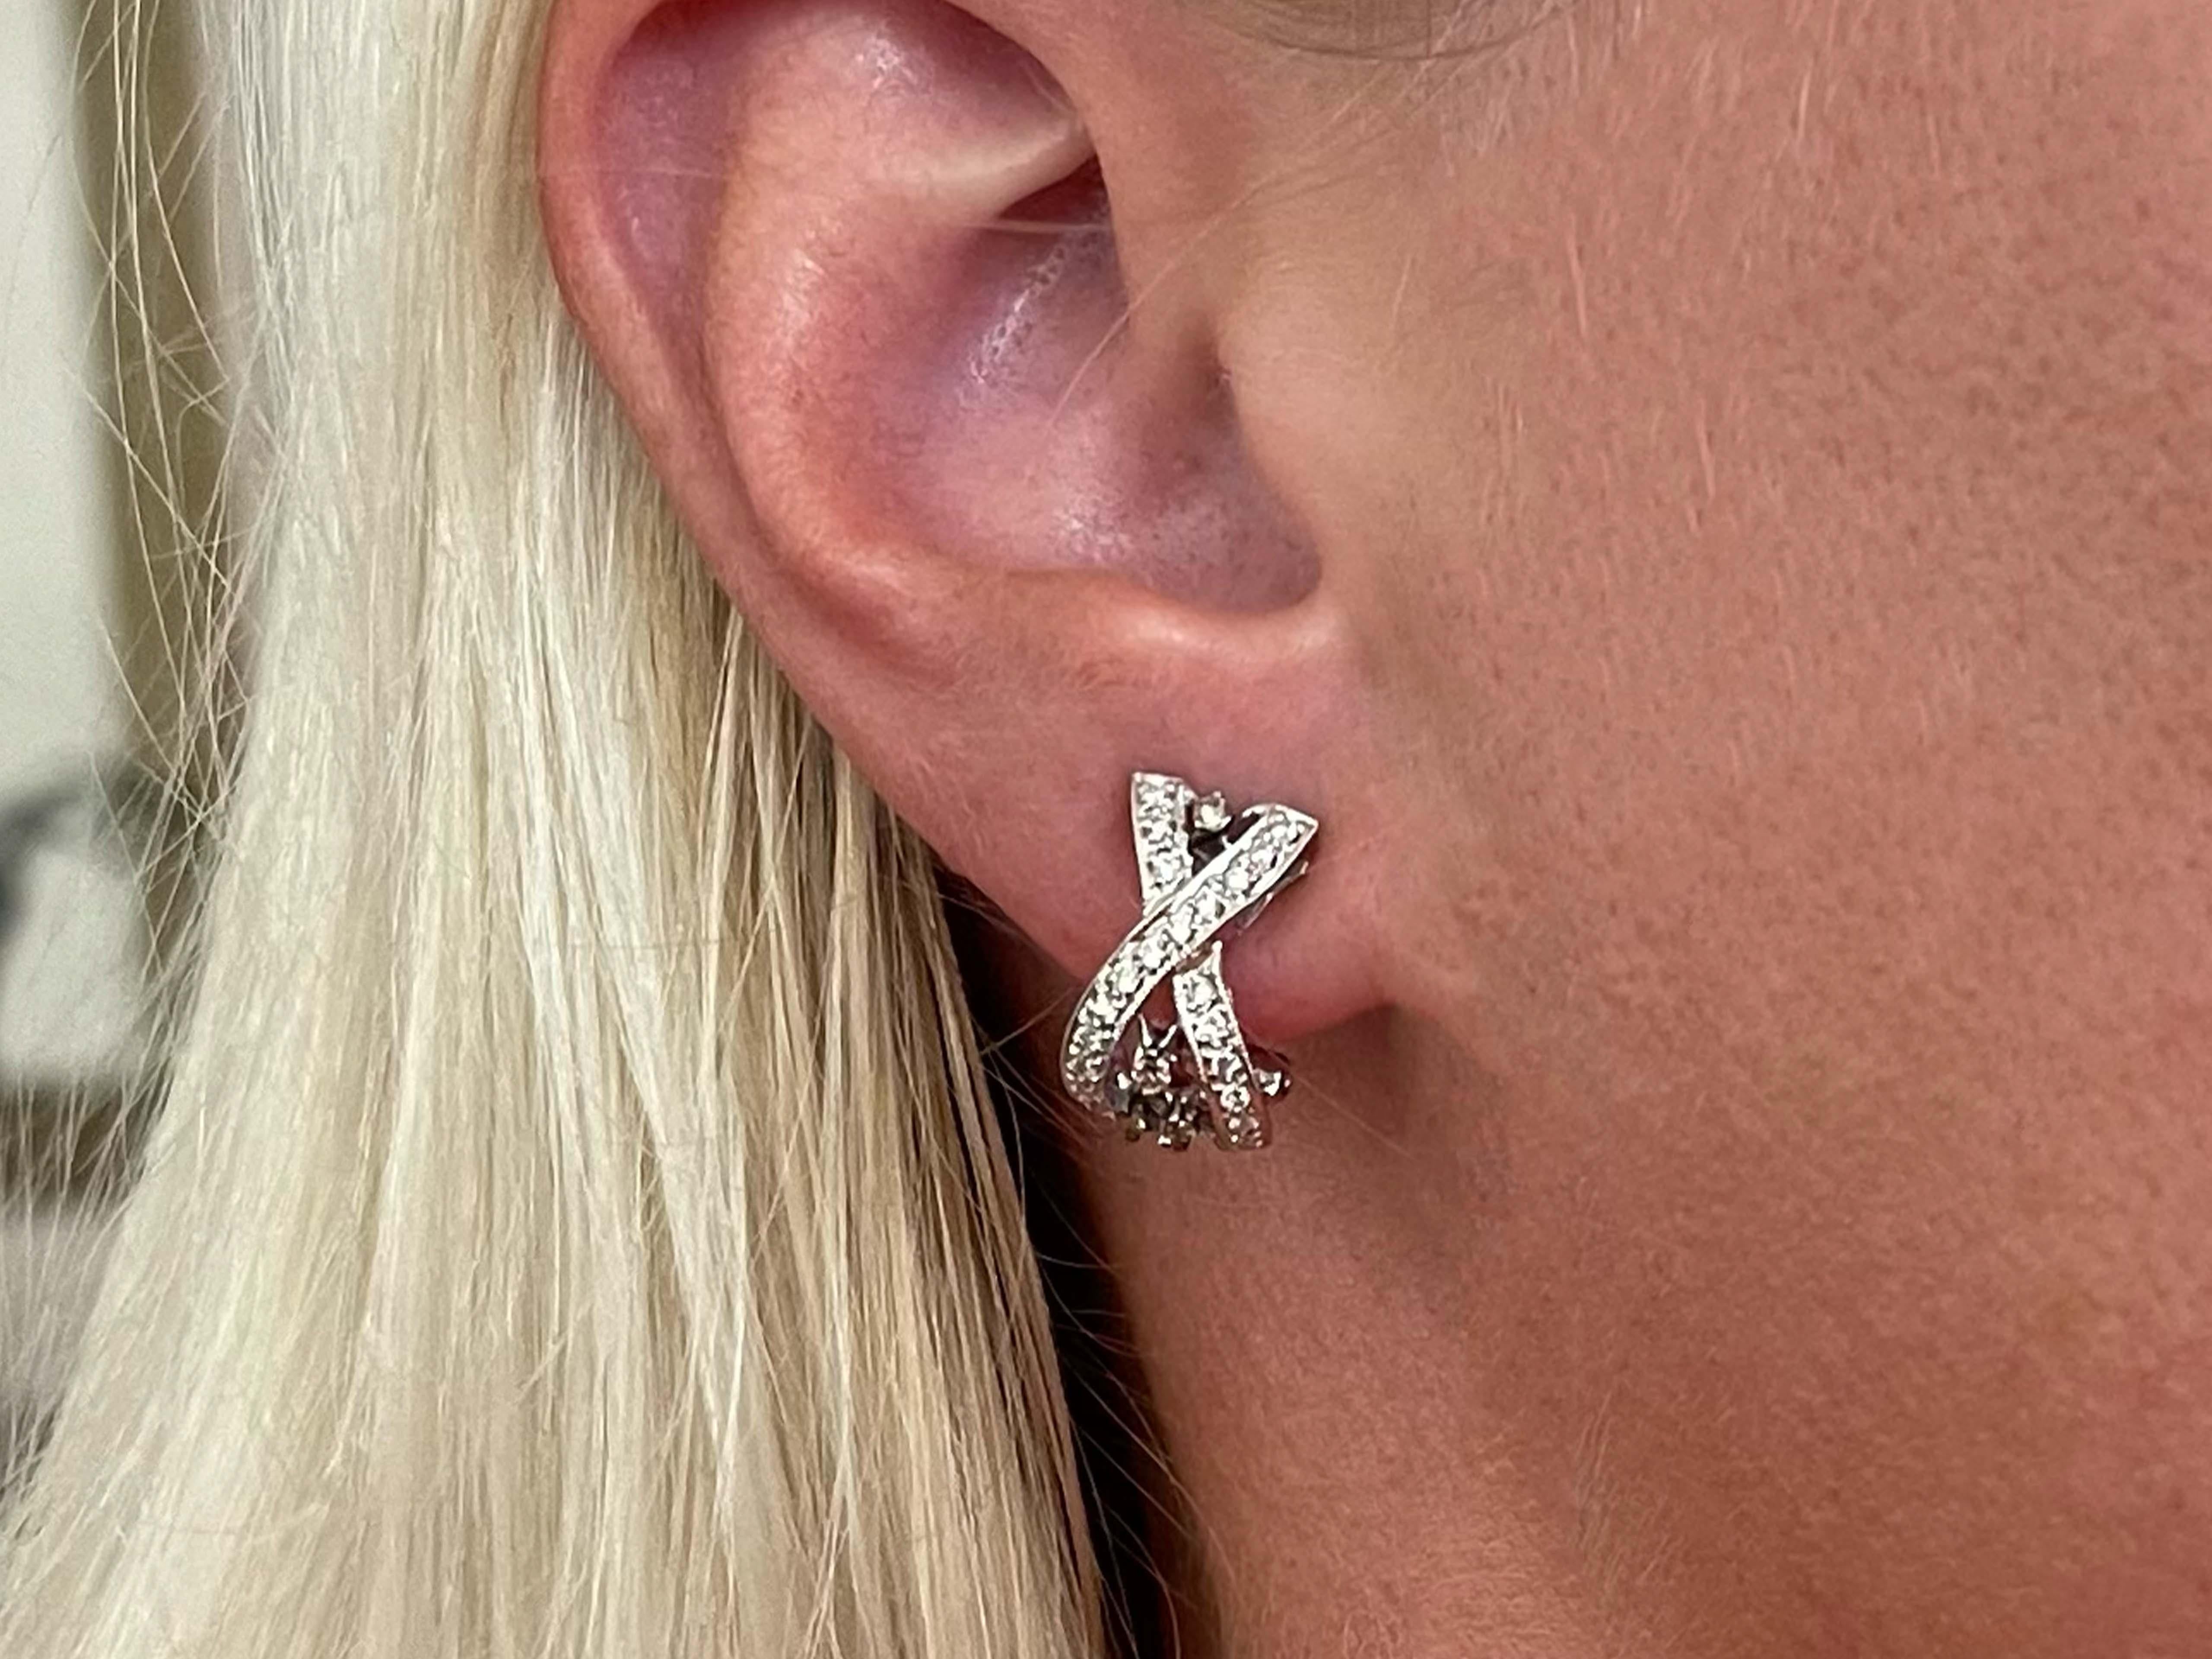 Earrings Specifications:

Metal: 18k White Gold

Total Weight: 5.3 Grams

Earring Measurements: 15.7 mm x 9 mm

Diamonds: 42 White Round Brilliant Cut Diamonds and 8 chocolate diamonds
Color: H-I

Clarity: SI1-SI2

Total Diamond Carat Weight: ~ .20